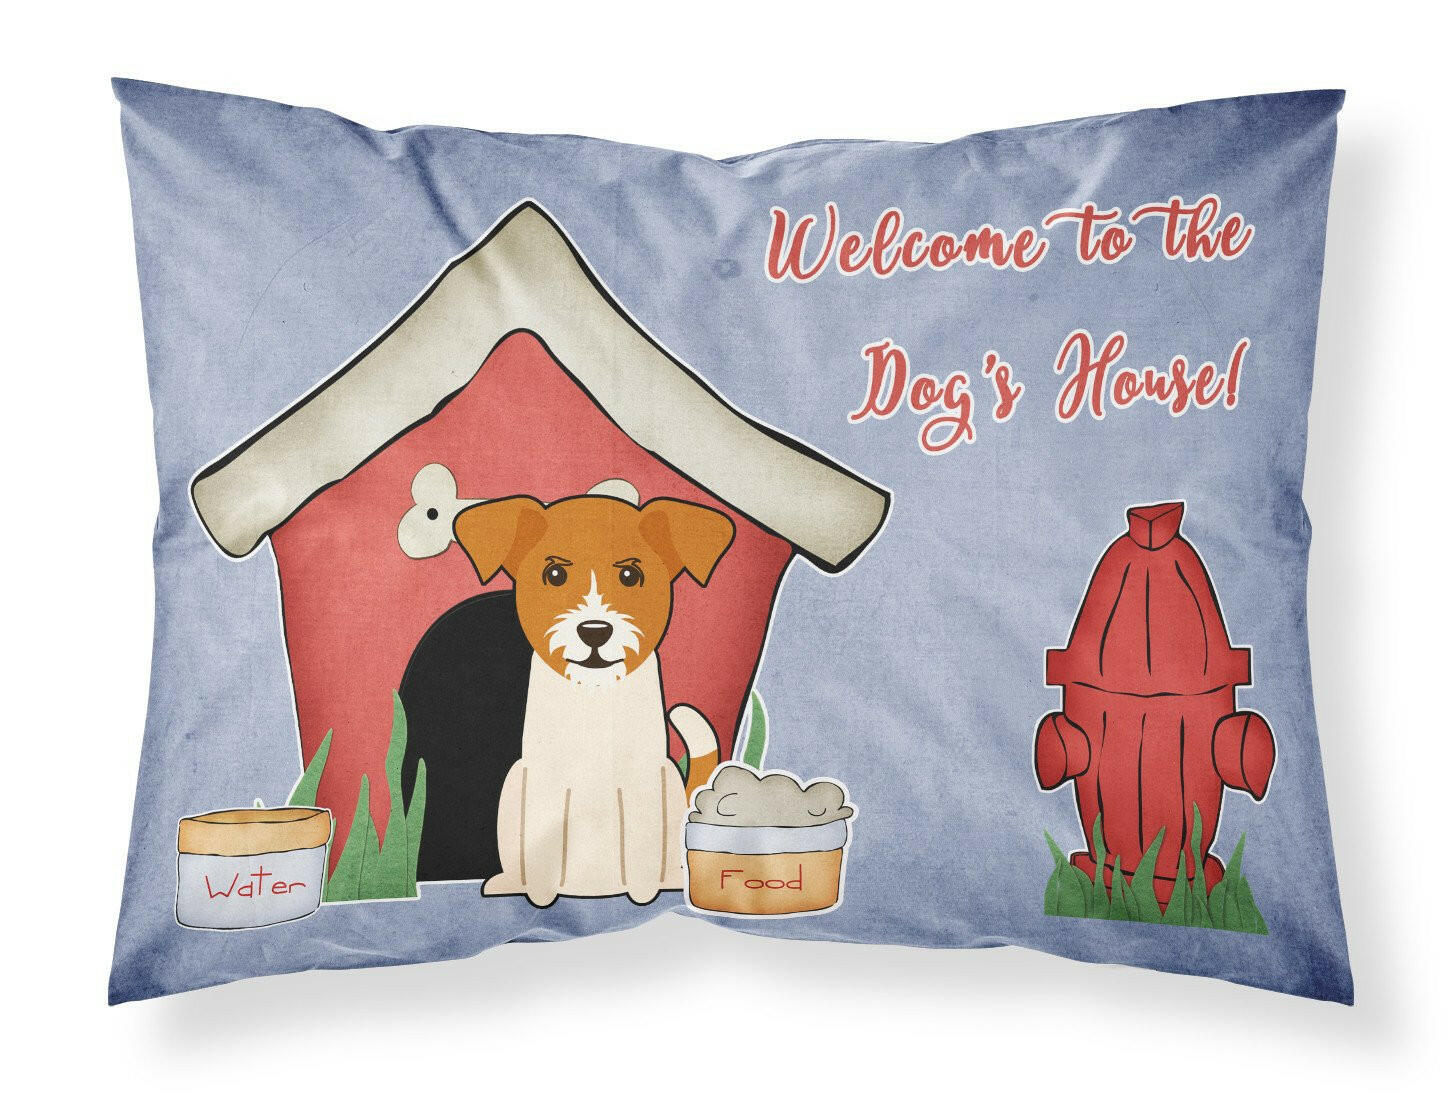 Dog House Collection Jack Russell Terrier Fabric Standard Pillowcase BB2862PILLOWCASE by Caroline's Treasures